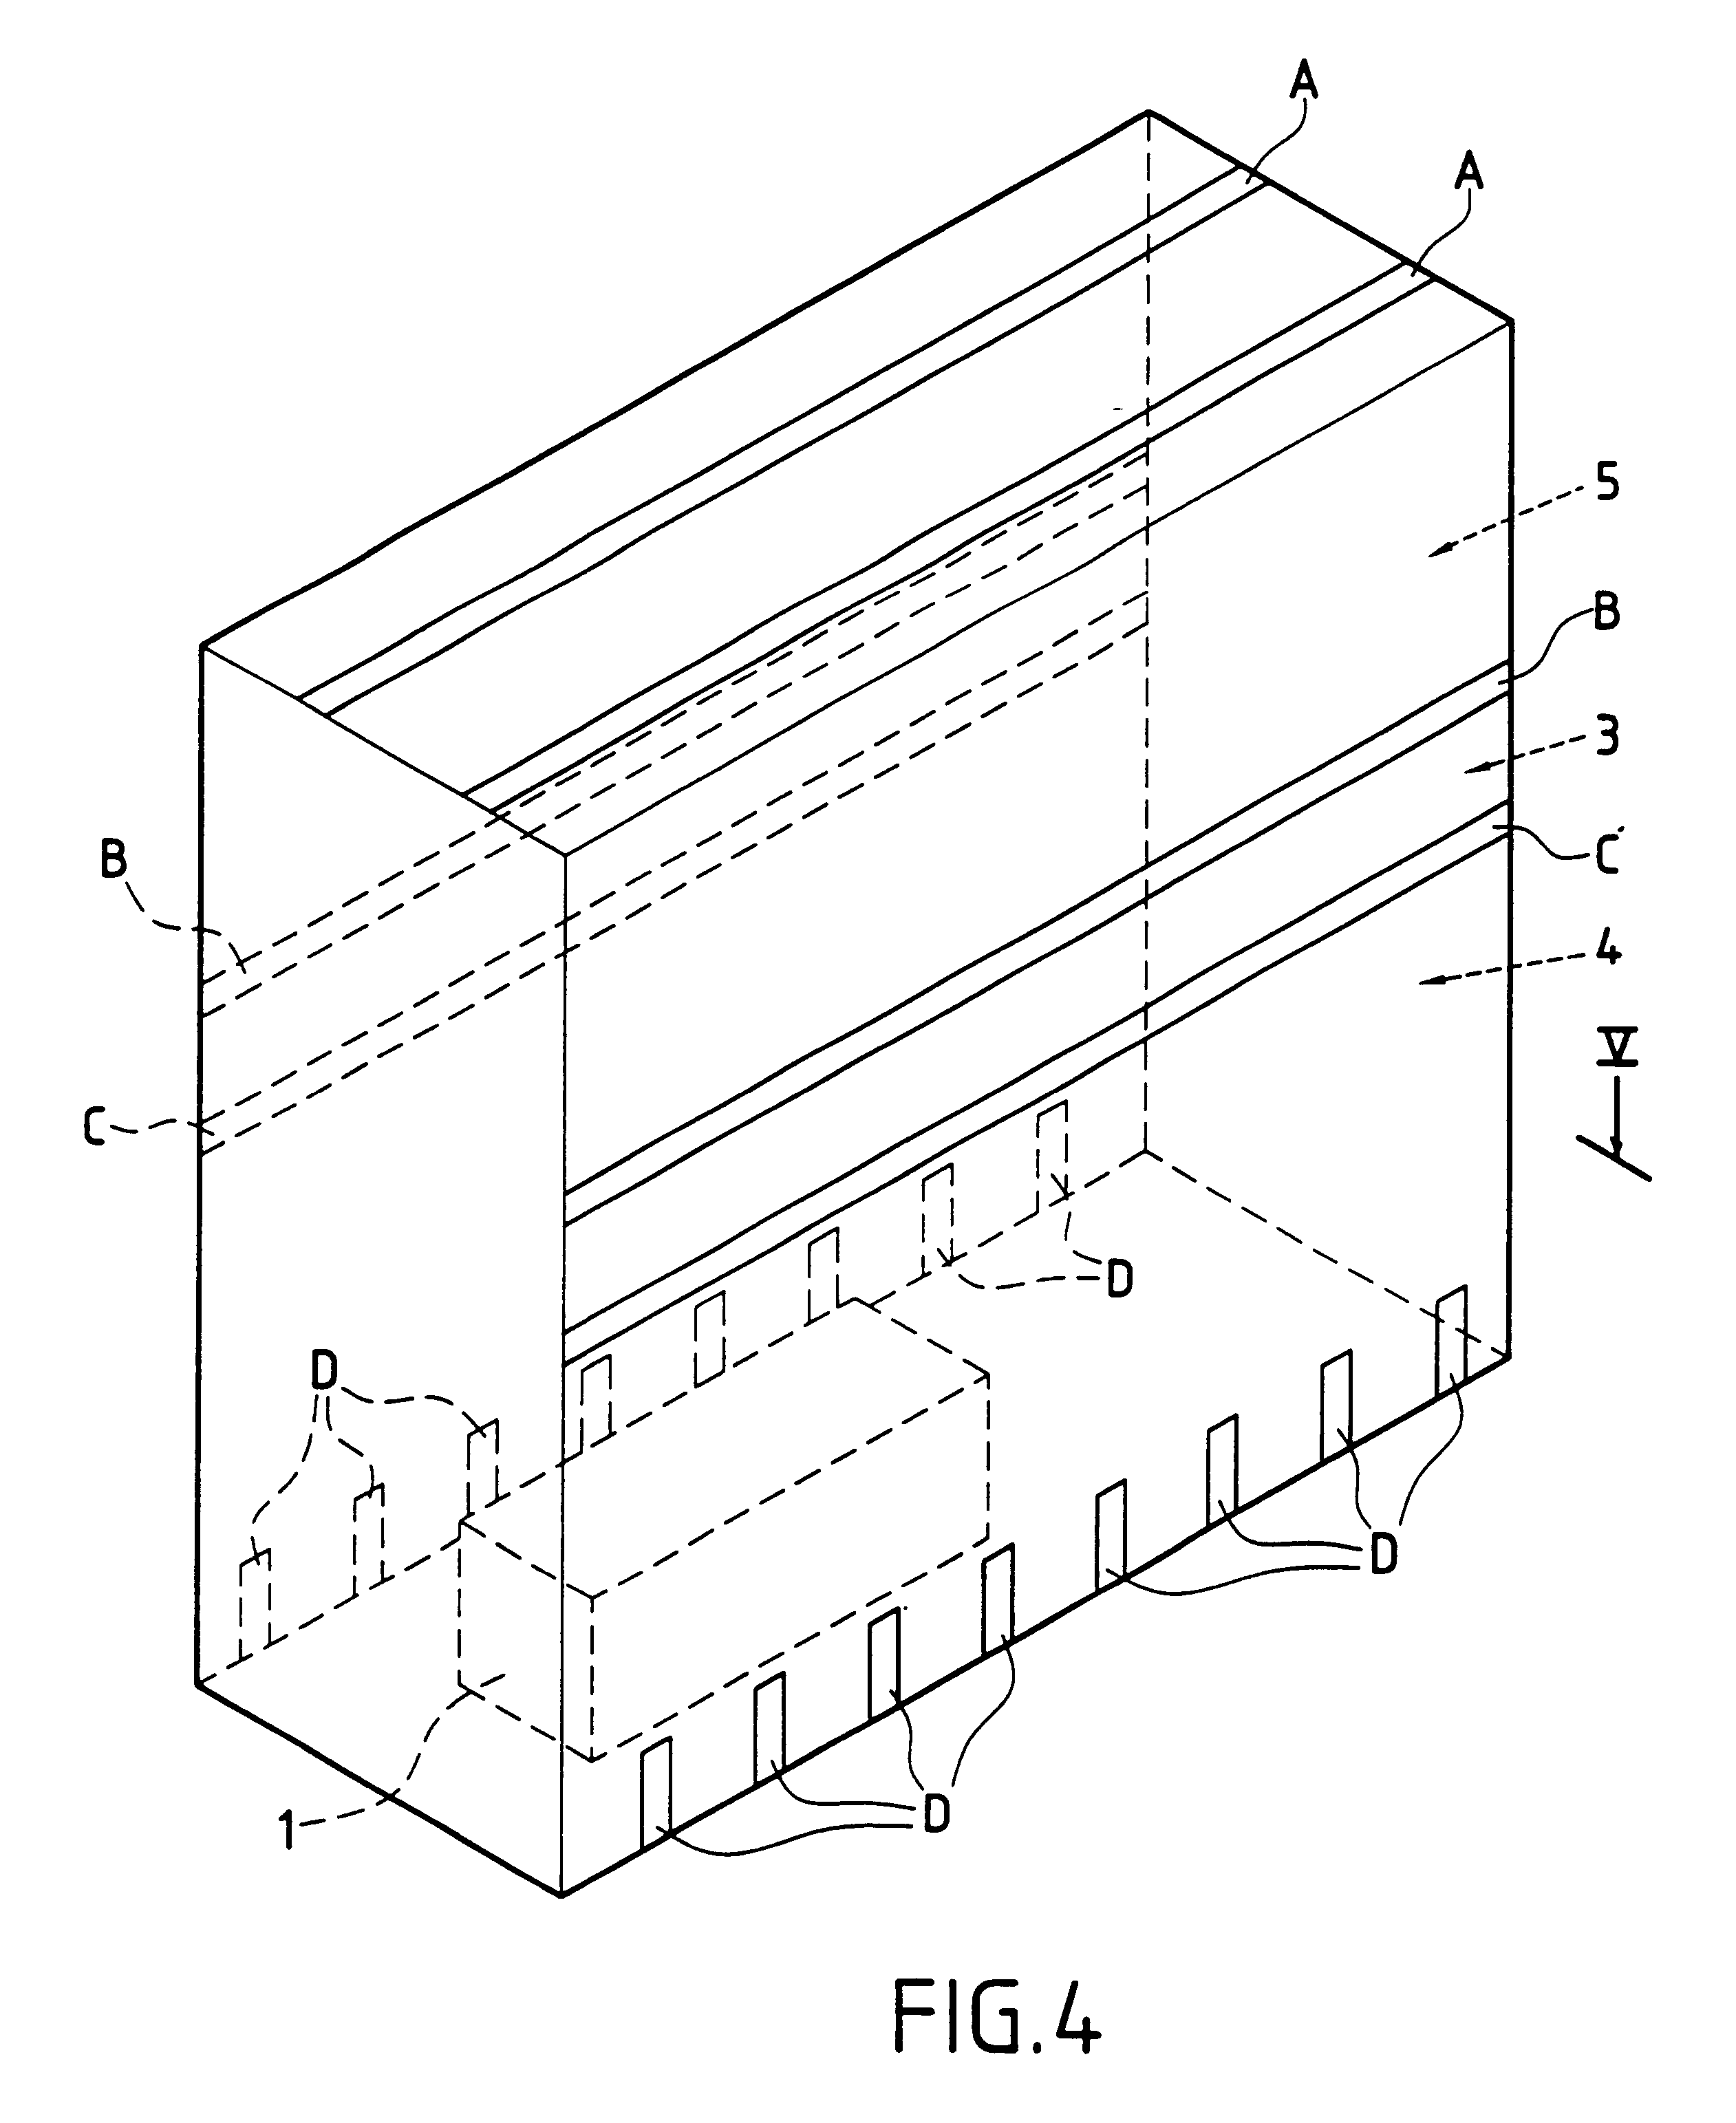 Method and apparatus for performing confinement by thermal stratification